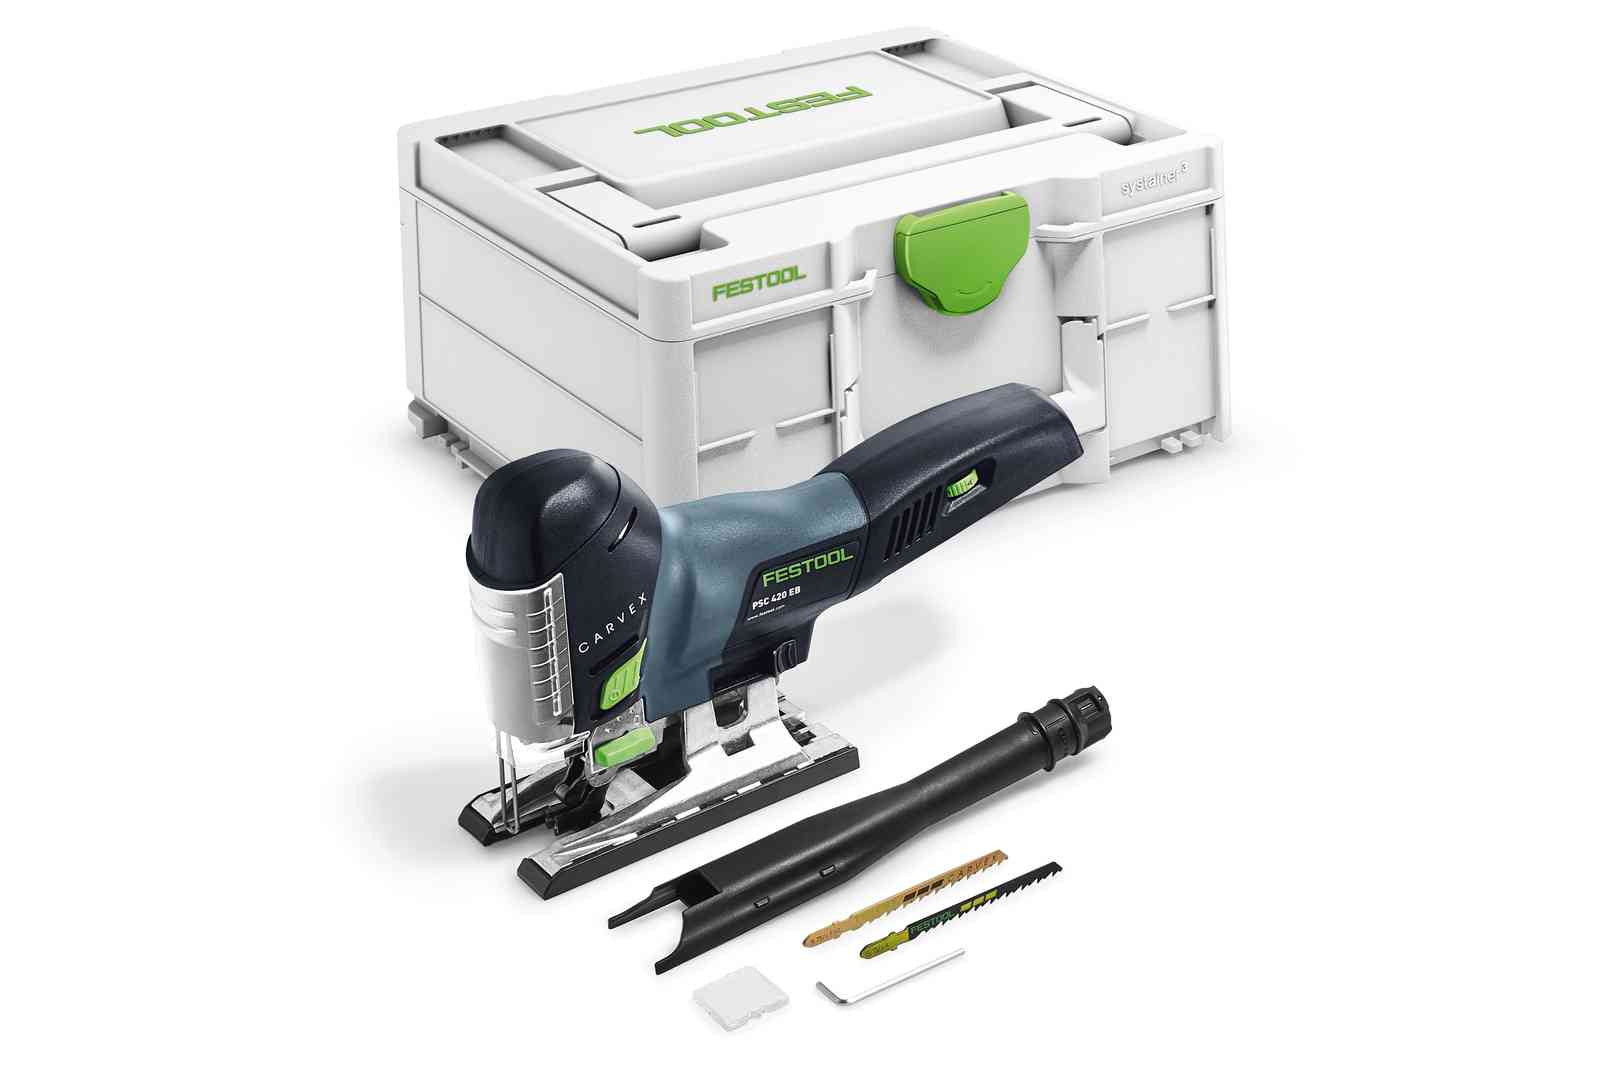 Festool Cordless Products – The Power Tool Store